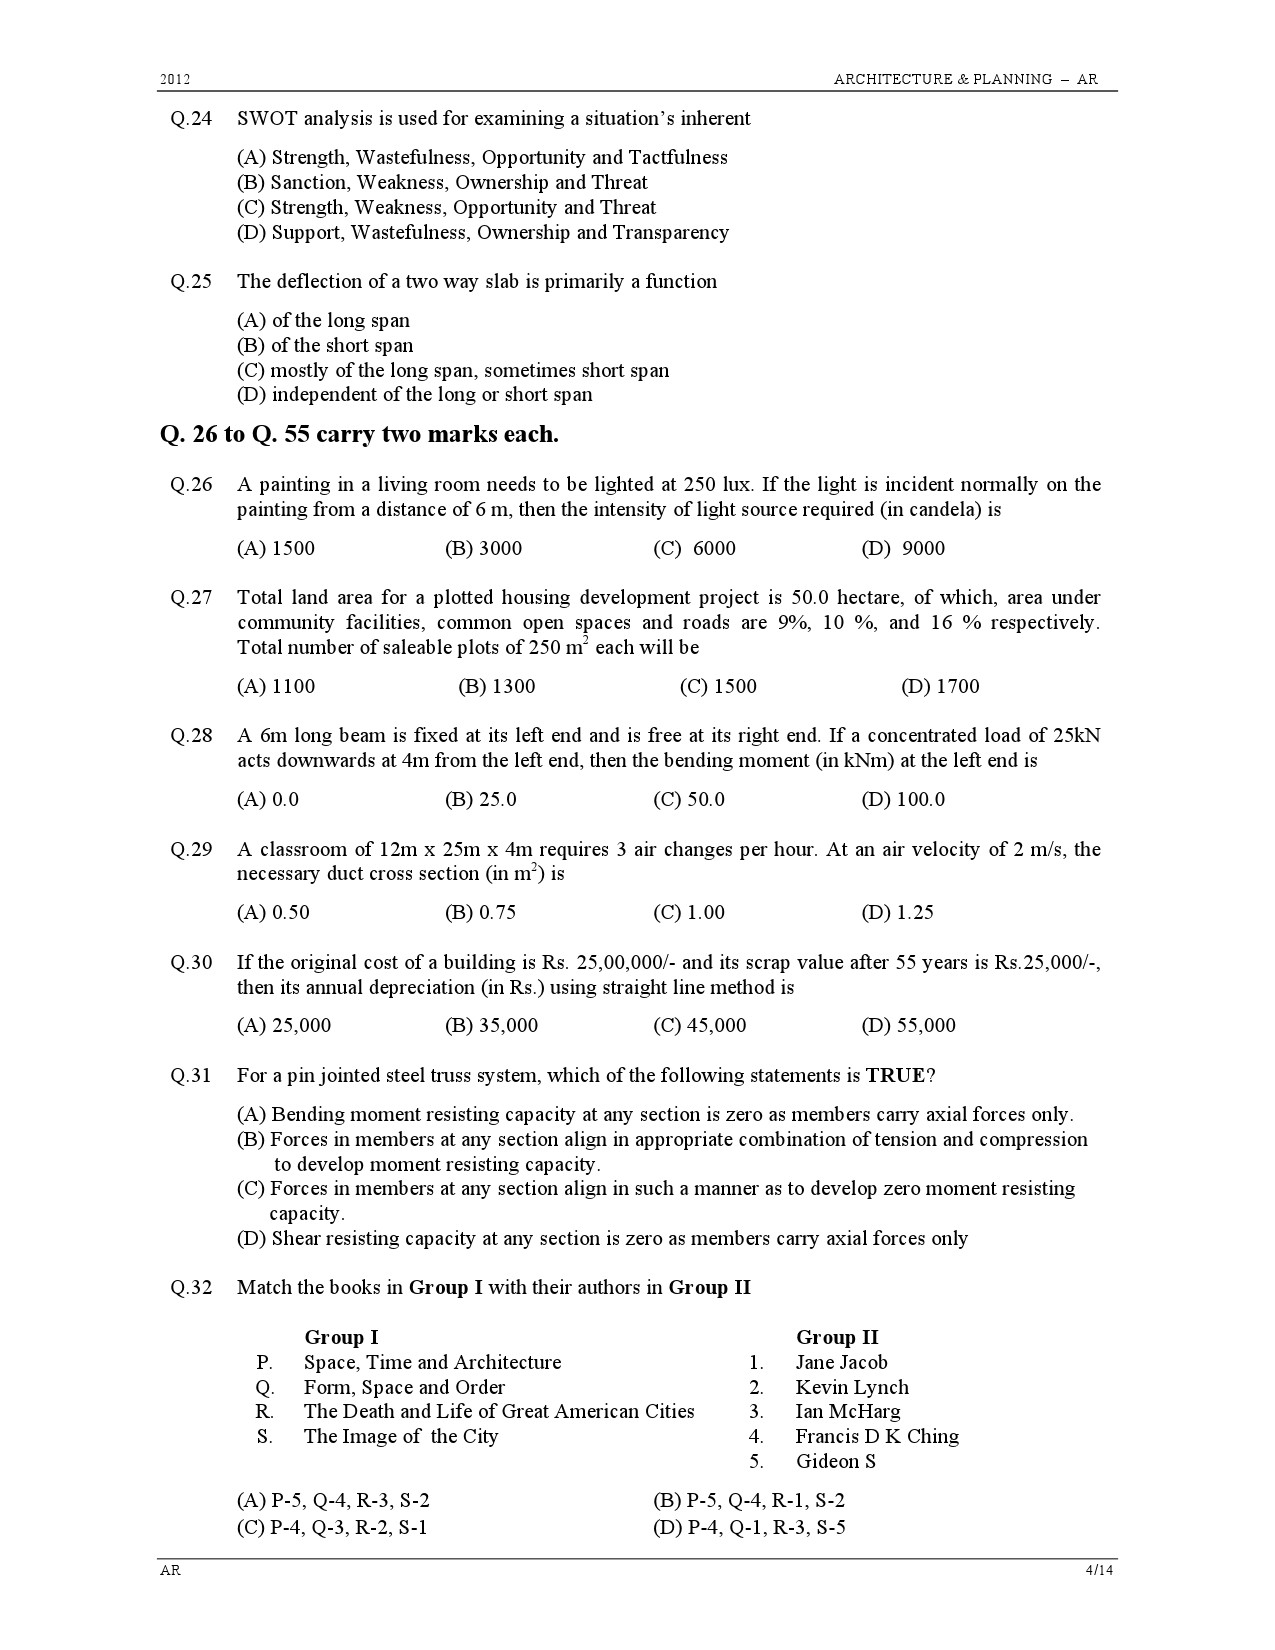 GATE Exam Question Paper 2012 Architecture and Planning 4